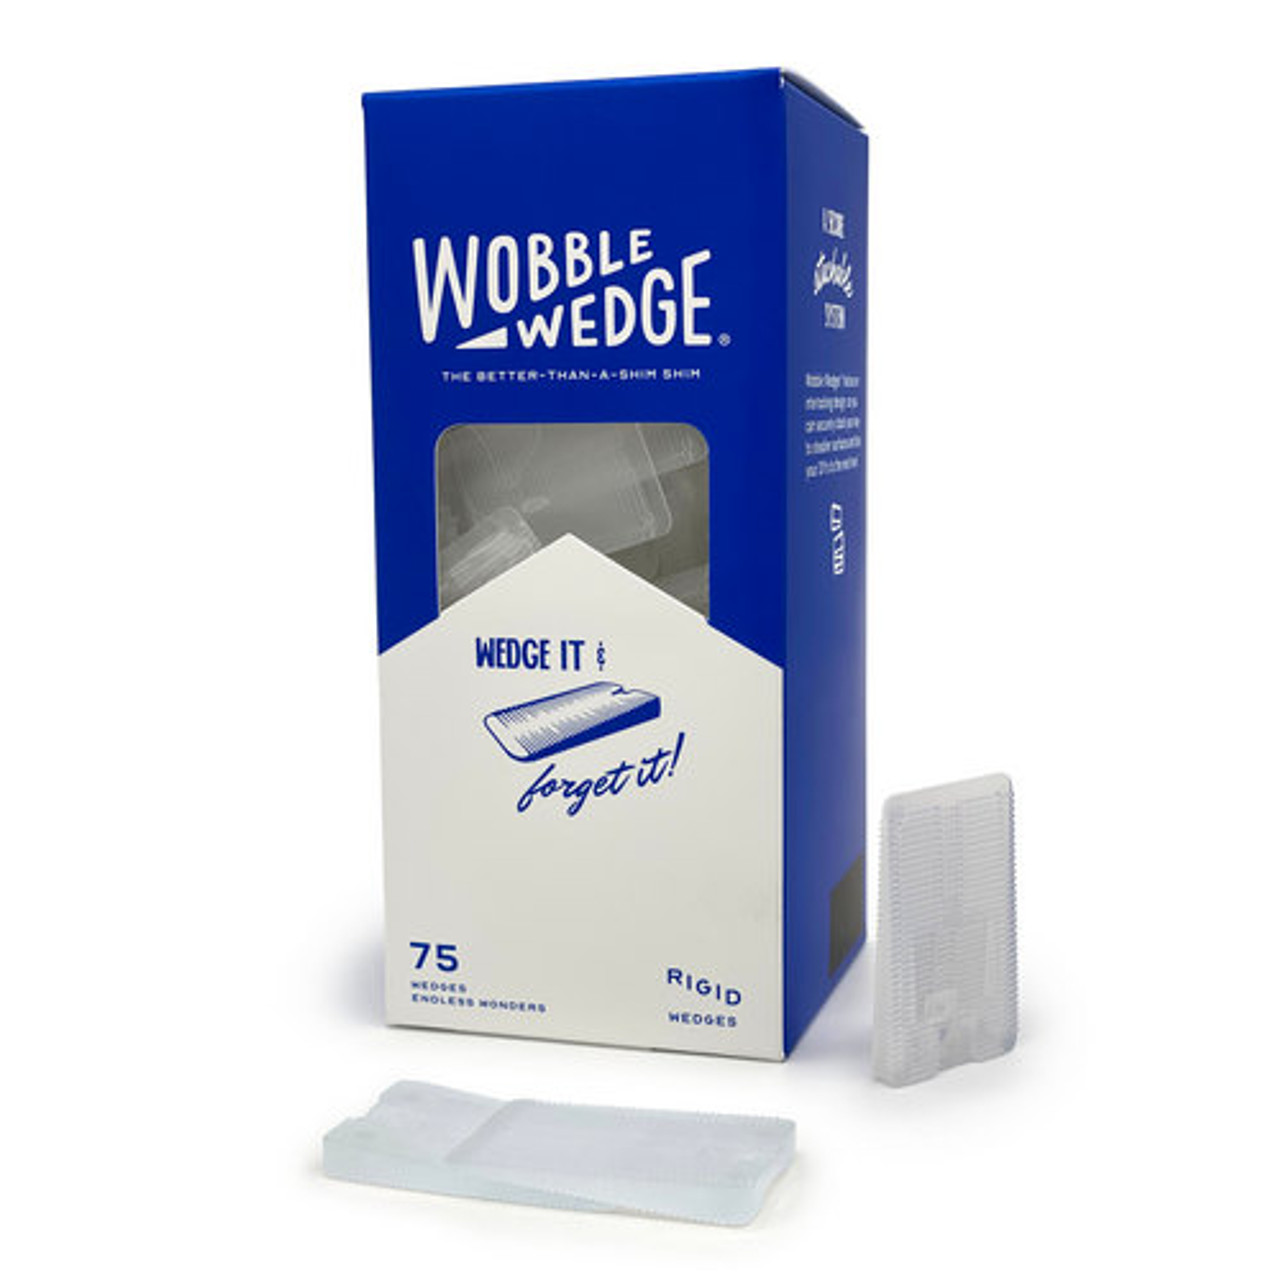 Wobble Wedge, Rigid , Clear, Bx/75 - Replacement Part For AllPoints 36352